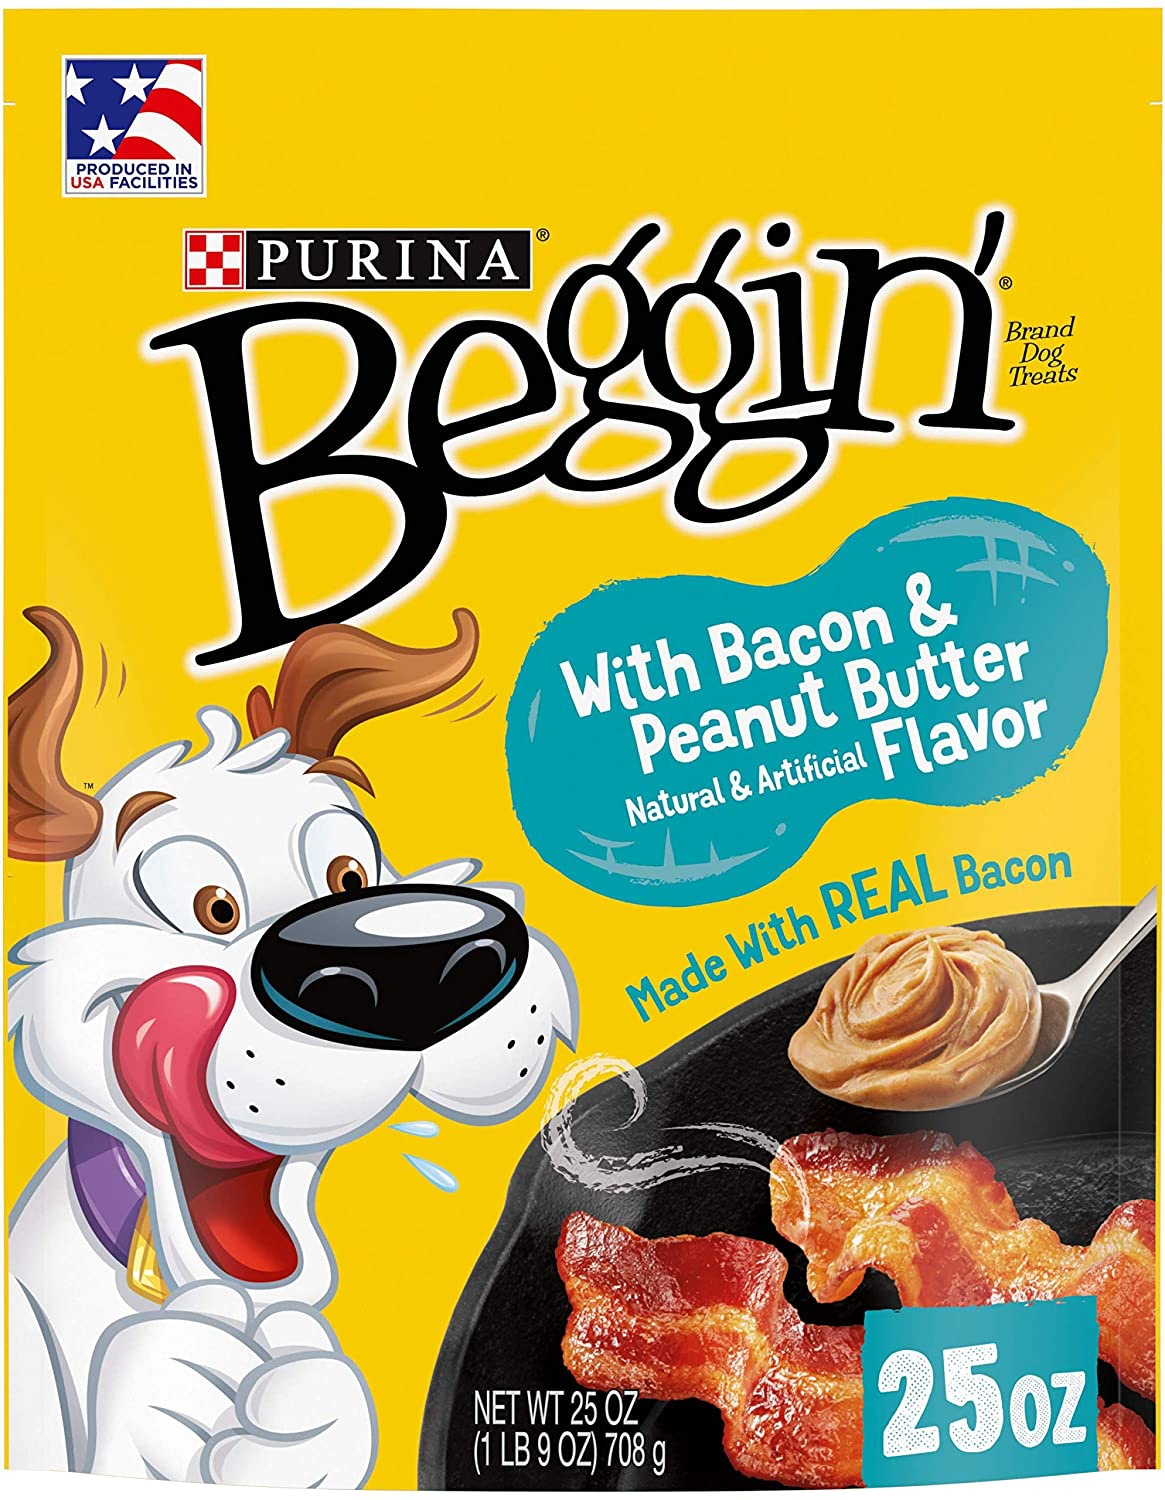 PURINA Beggin' Strips Bacon & Peanut Butter Dog Treats Made in USA Facilities Adult Dog Training Treats Animals & Pet Supplies > Pet Supplies > Dog Supplies > Dog Treats Purina Beggin' Bacon & Peanut Butter 25 oz. Pouch 